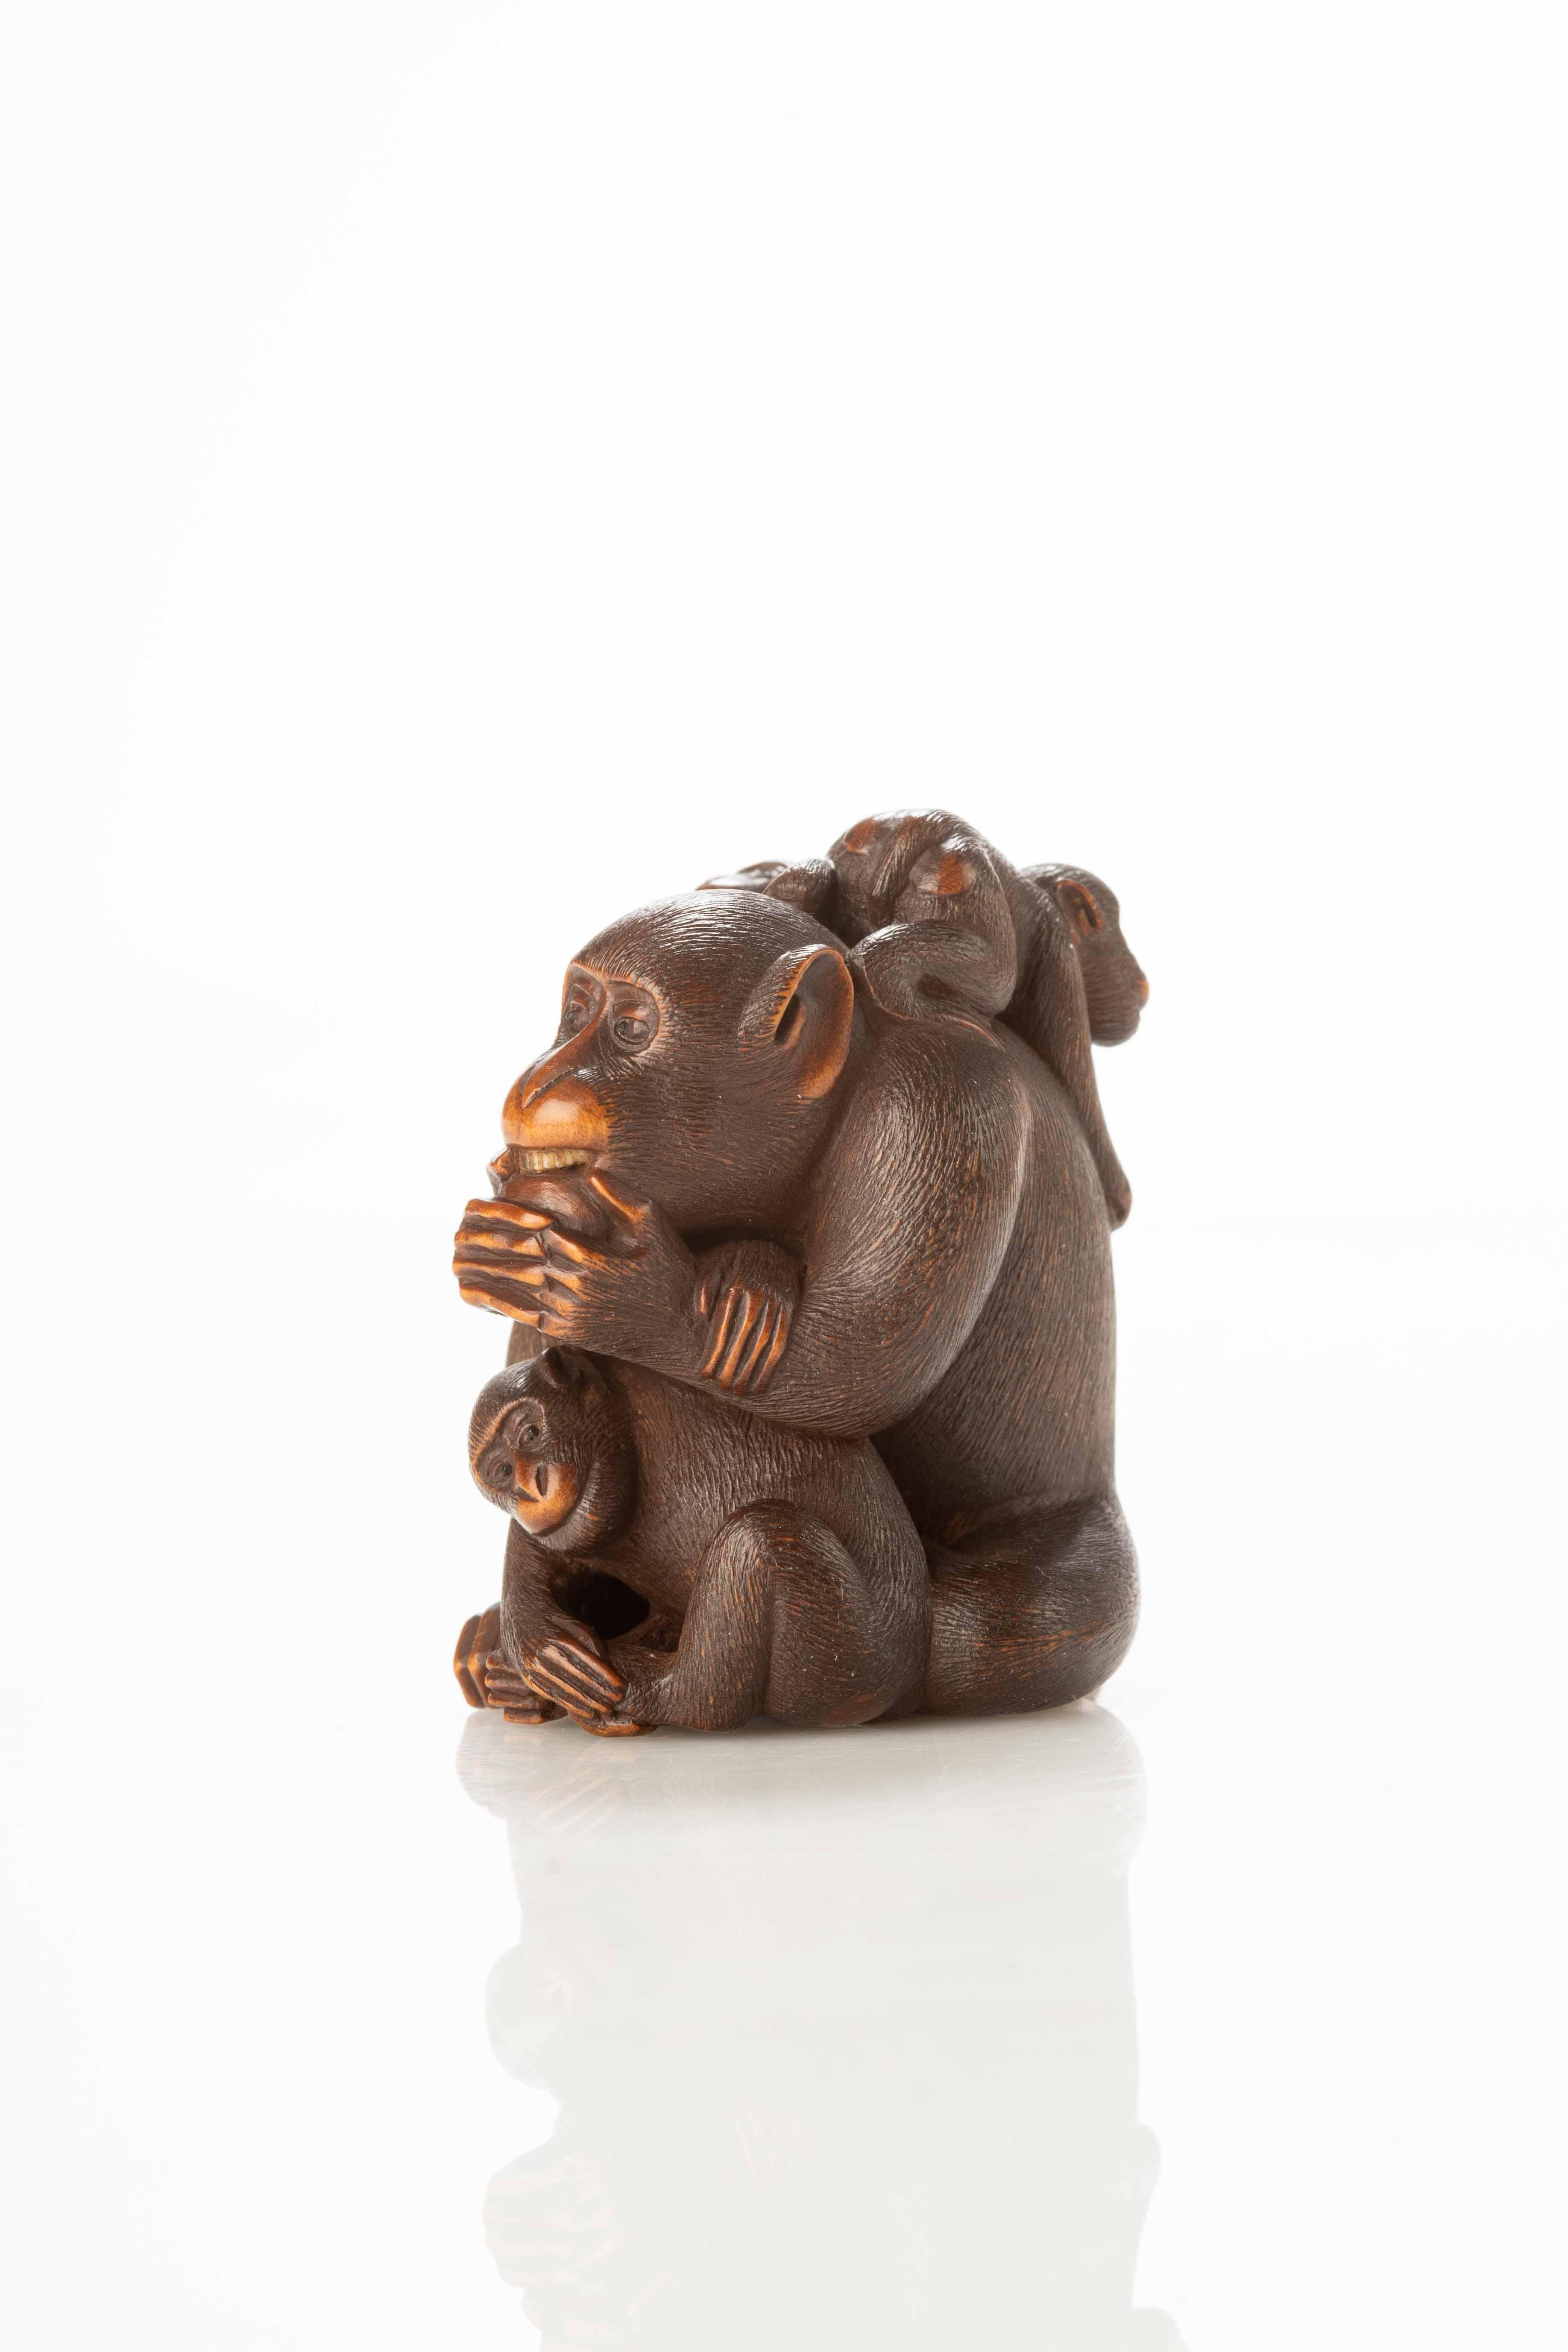 Boxwood netsuke, depicting a group of five monkeys, with the largest, surrounded by cubs, feeding on a peach.

The netsuke is signed Masanao, within an oval reserve under the base.

Origin: Japan

Period: Edo 19th century

Dimensions: 5 x 5.5 x 3.8